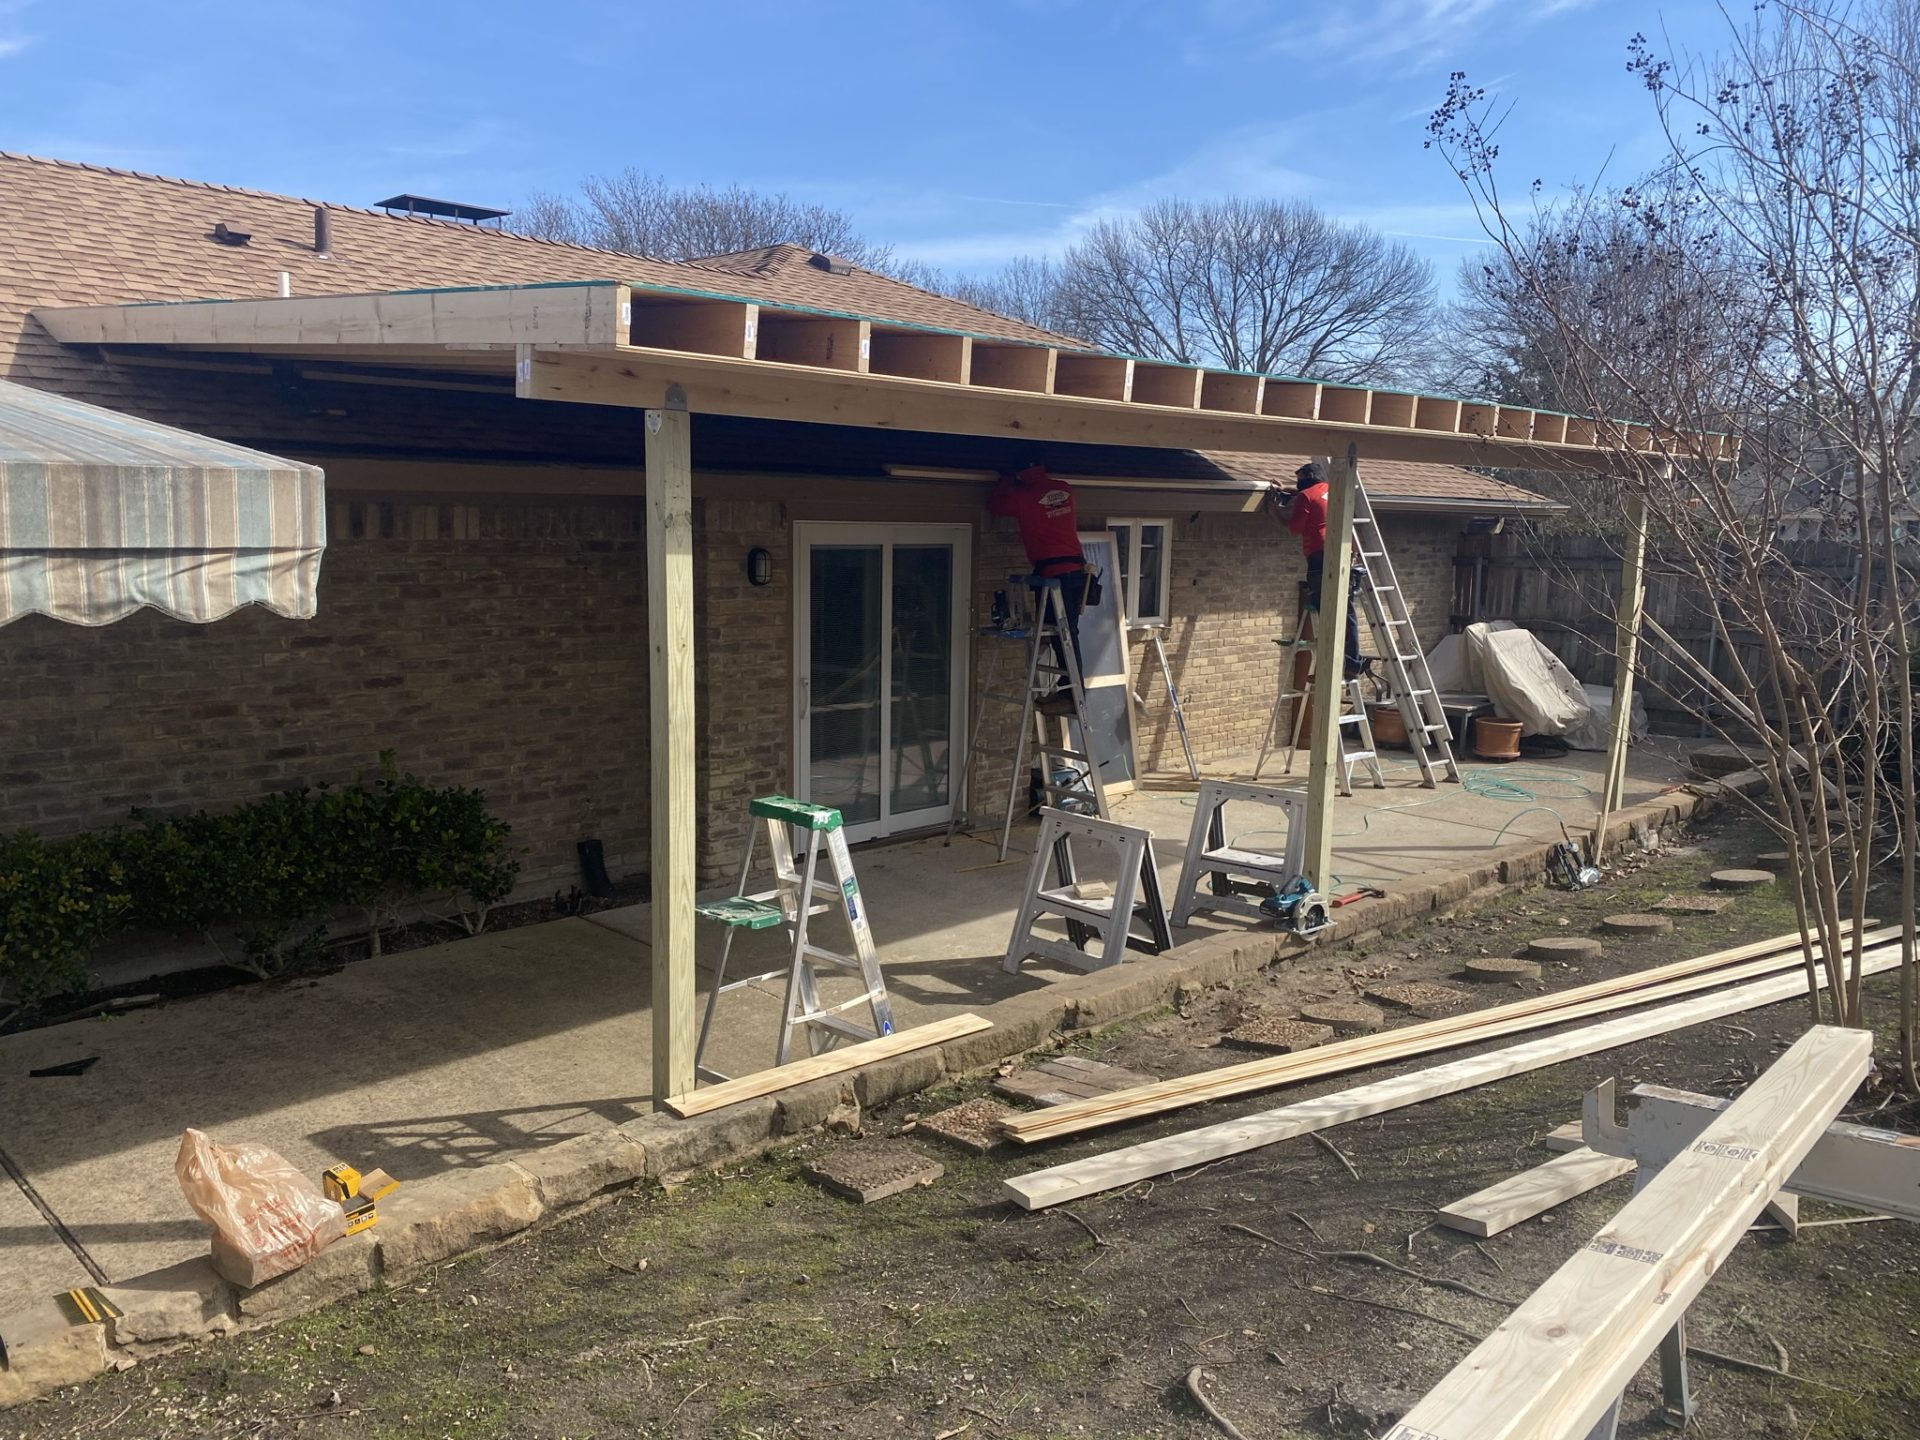 Jenkins Roofing and Construction workers working on an outdoor patio project in the Dallas Fort Worth area